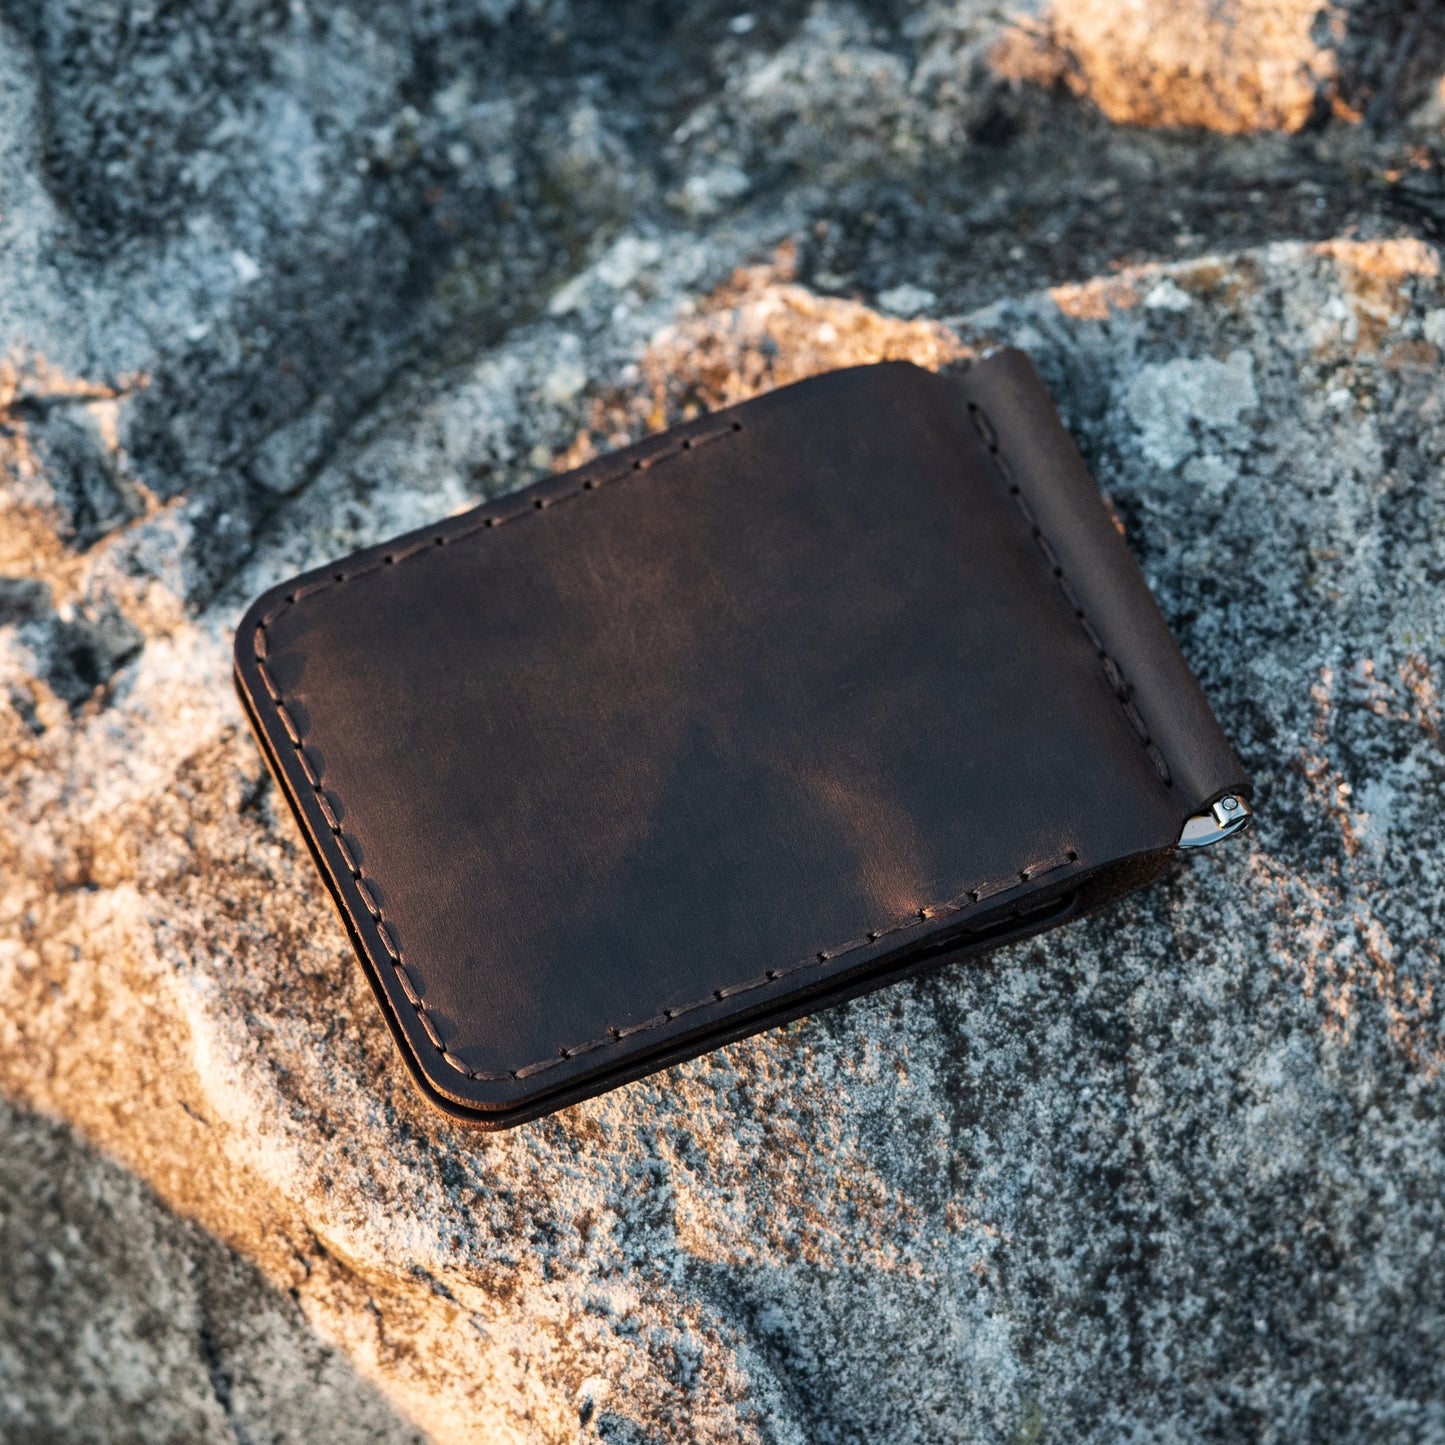 Leather Money Clip | Rustic Minimalist Wallet | Hand-Stitched & Eco Friendly | Groomsman, anniversary, best man gift